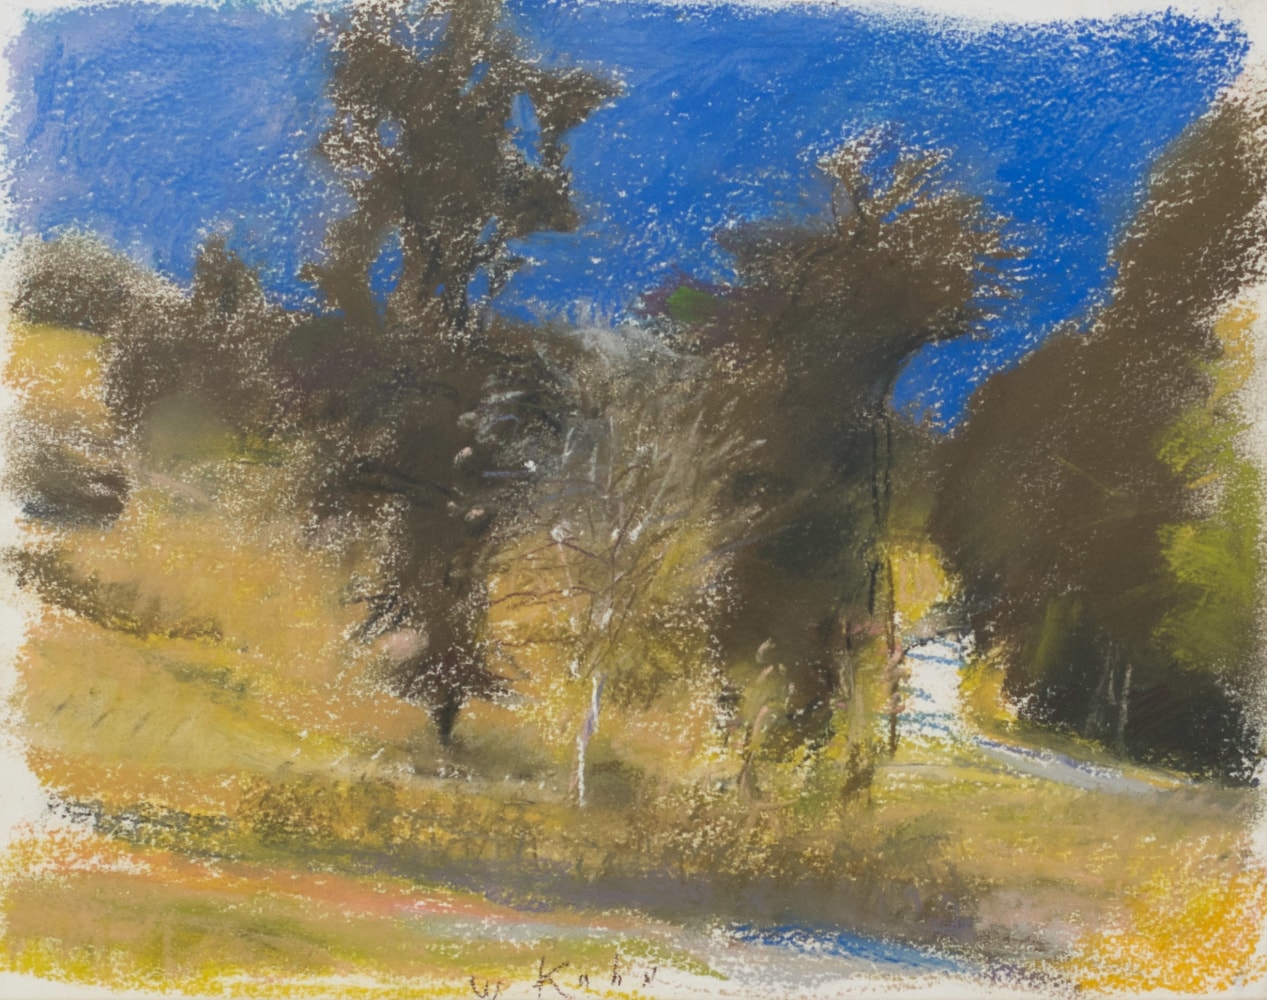 The Start of Covey Road, is an original Wolf Kahn pastel for sale at, Manolis Projects Gallery. This pastel is of a Wolf Kahn landscape with several trees in green and blue, and was completed in 2001. This pastel on paper is 11 inches high x 14 inches wide. This artwork is a classic example of Kahn’s style as it features the fusion of color, spontaneity, and loose strokes, which create the luminous and vibrant atmospheric rural New England landscapes and color fields. Kahn’s unique blend of American Realism and the formal discipline of Color Field painting sets the work of Wolf Kahn apart from his contemporaries. It is one of many original Wolf Kahn artworks for sale at Manolis Projects Gallery Miami.